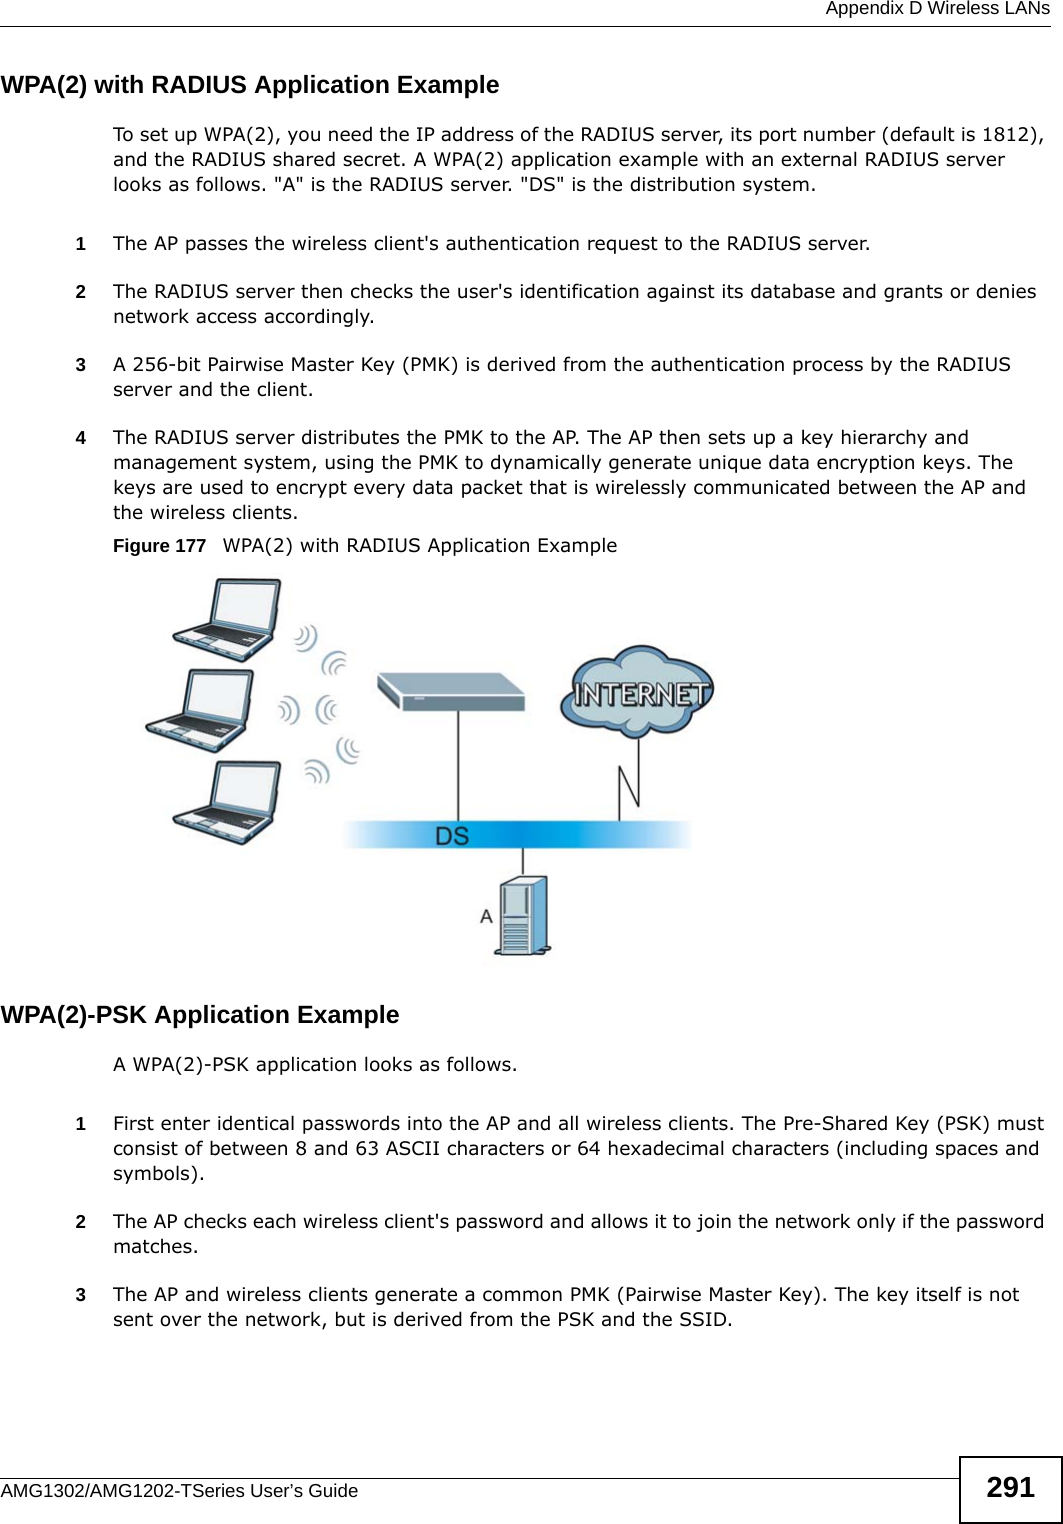  Appendix D Wireless LANsAMG1302/AMG1202-TSeries User’s Guide 291WPA(2) with RADIUS Application ExampleTo set up WPA(2), you need the IP address of the RADIUS server, its port number (default is 1812), and the RADIUS shared secret. A WPA(2) application example with an external RADIUS server looks as follows. &quot;A&quot; is the RADIUS server. &quot;DS&quot; is the distribution system.1The AP passes the wireless client&apos;s authentication request to the RADIUS server.2The RADIUS server then checks the user&apos;s identification against its database and grants or denies network access accordingly.3A 256-bit Pairwise Master Key (PMK) is derived from the authentication process by the RADIUS server and the client.4The RADIUS server distributes the PMK to the AP. The AP then sets up a key hierarchy and management system, using the PMK to dynamically generate unique data encryption keys. The keys are used to encrypt every data packet that is wirelessly communicated between the AP and the wireless clients.Figure 177   WPA(2) with RADIUS Application ExampleWPA(2)-PSK Application ExampleA WPA(2)-PSK application looks as follows.1First enter identical passwords into the AP and all wireless clients. The Pre-Shared Key (PSK) must consist of between 8 and 63 ASCII characters or 64 hexadecimal characters (including spaces and symbols).2The AP checks each wireless client&apos;s password and allows it to join the network only if the password matches.3The AP and wireless clients generate a common PMK (Pairwise Master Key). The key itself is not sent over the network, but is derived from the PSK and the SSID. 